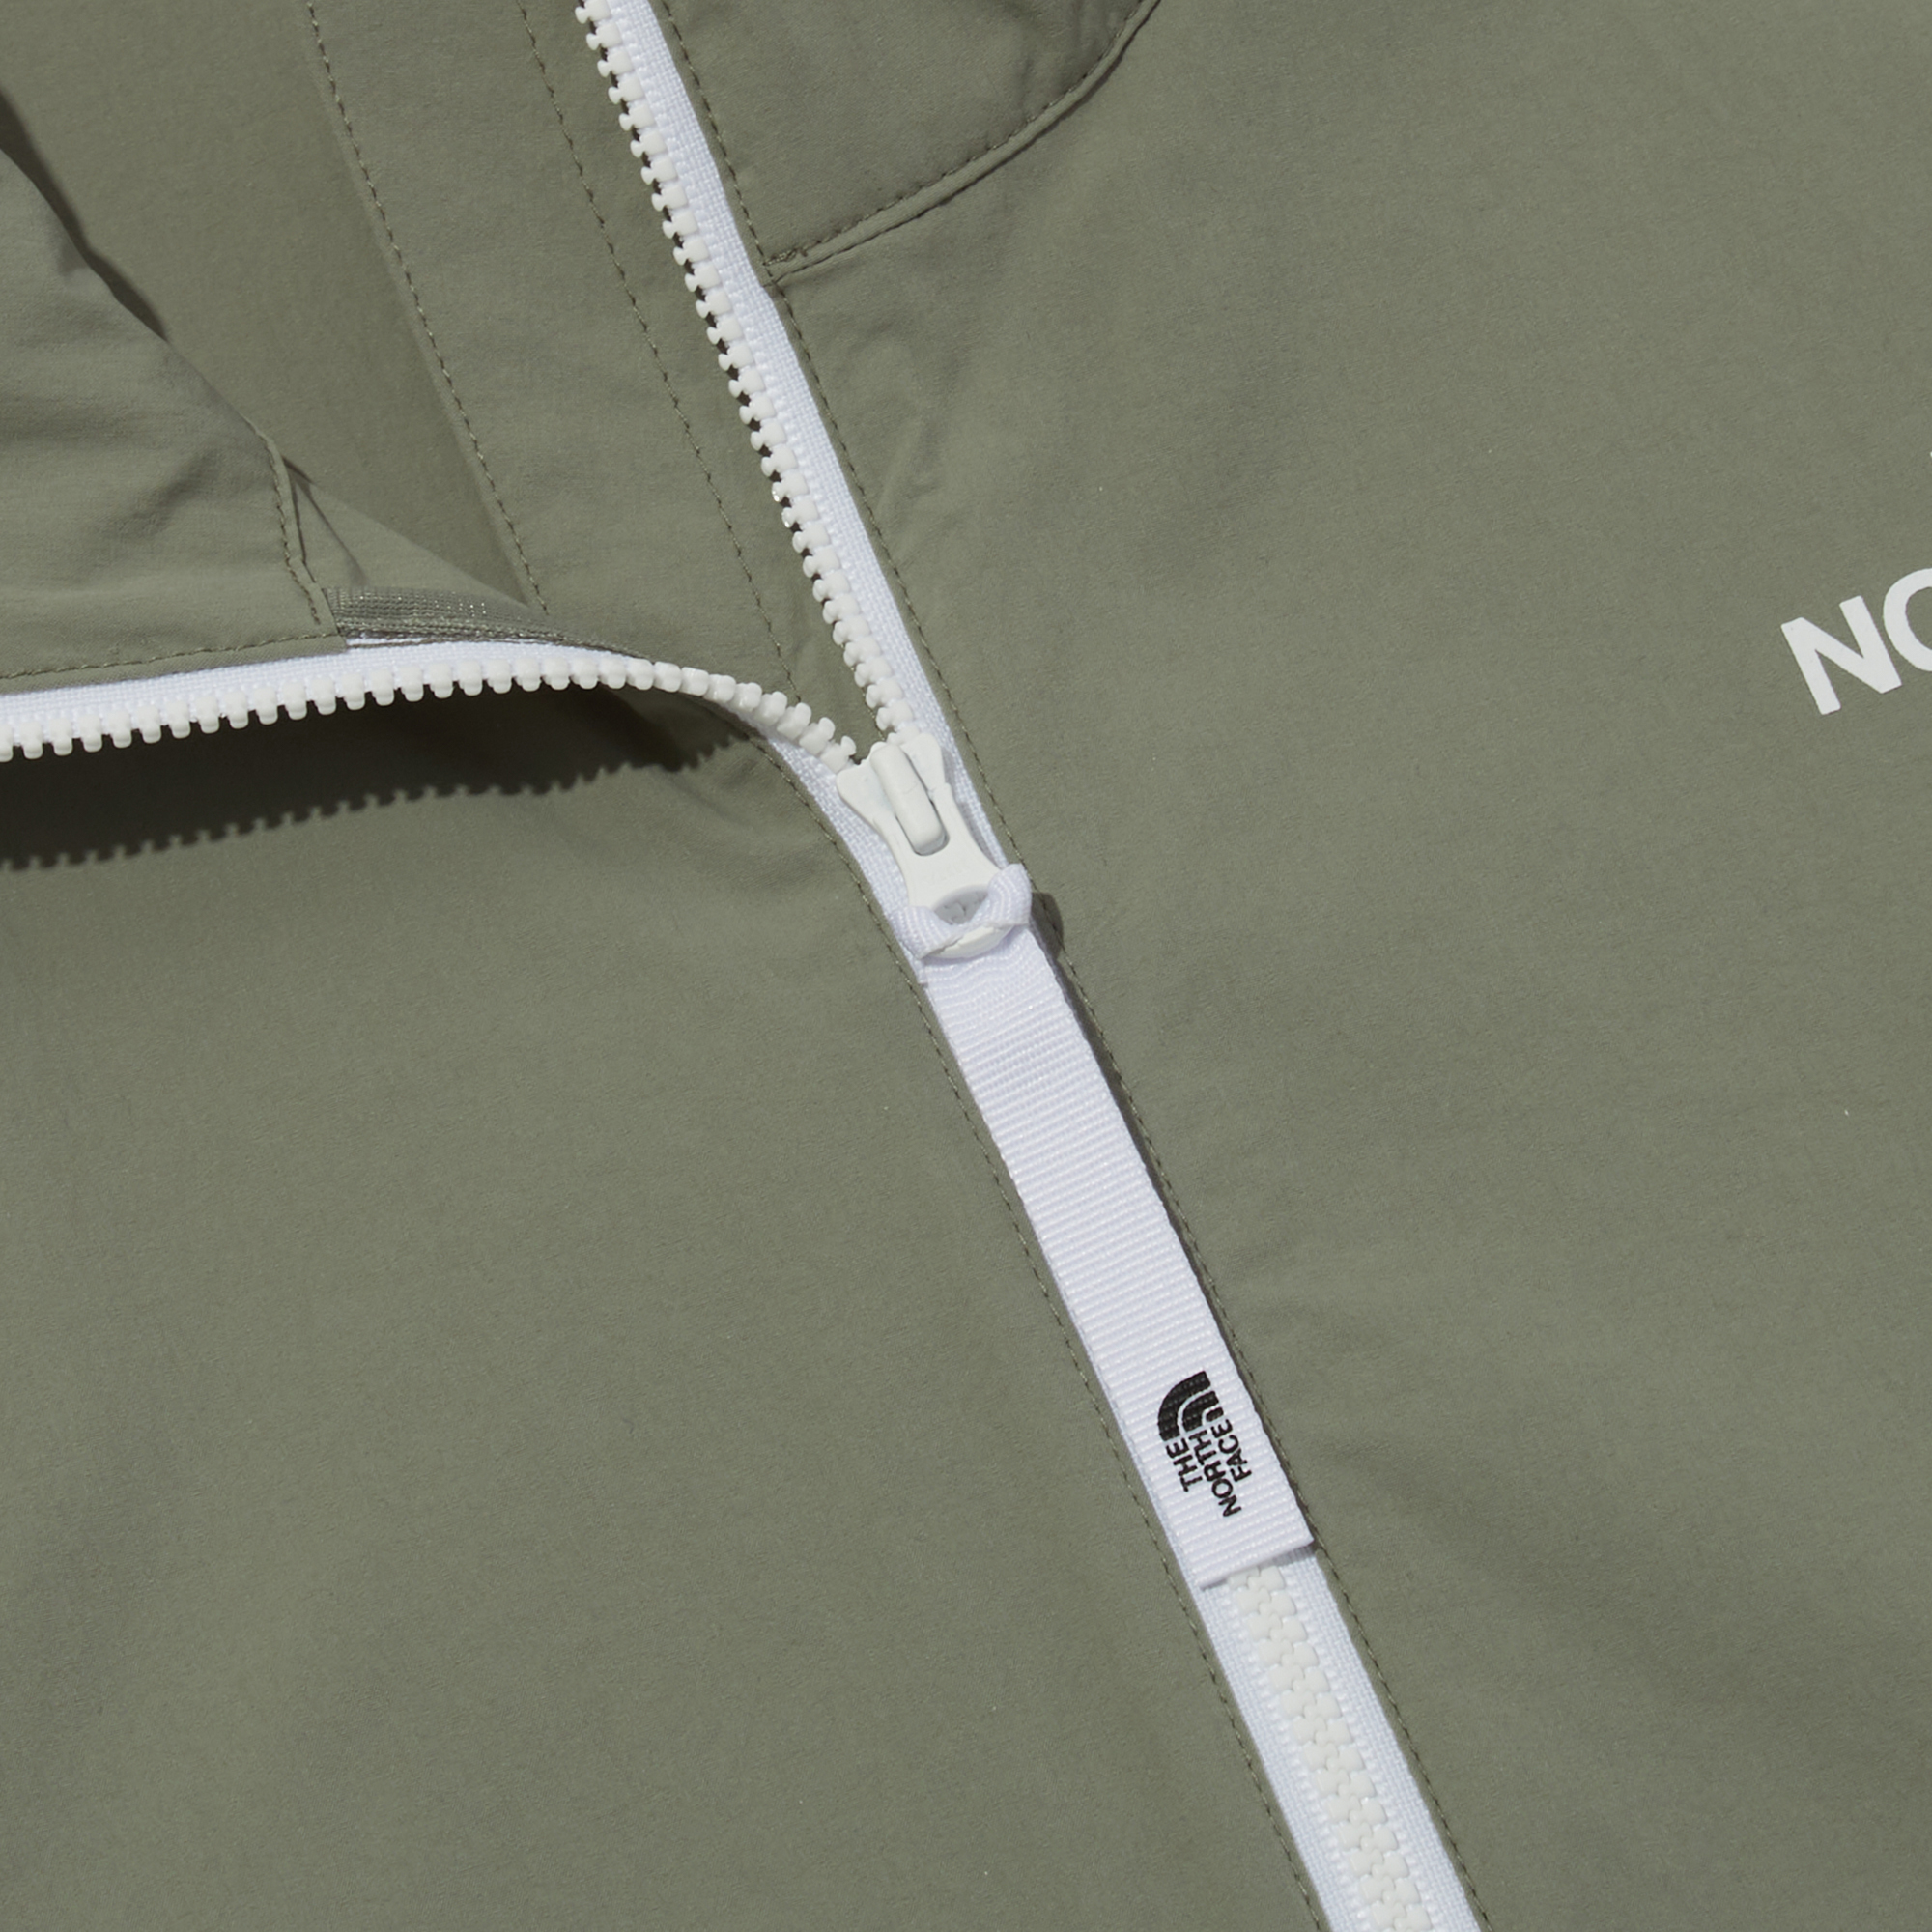 The North Face Ambition 1/4 Zip Review